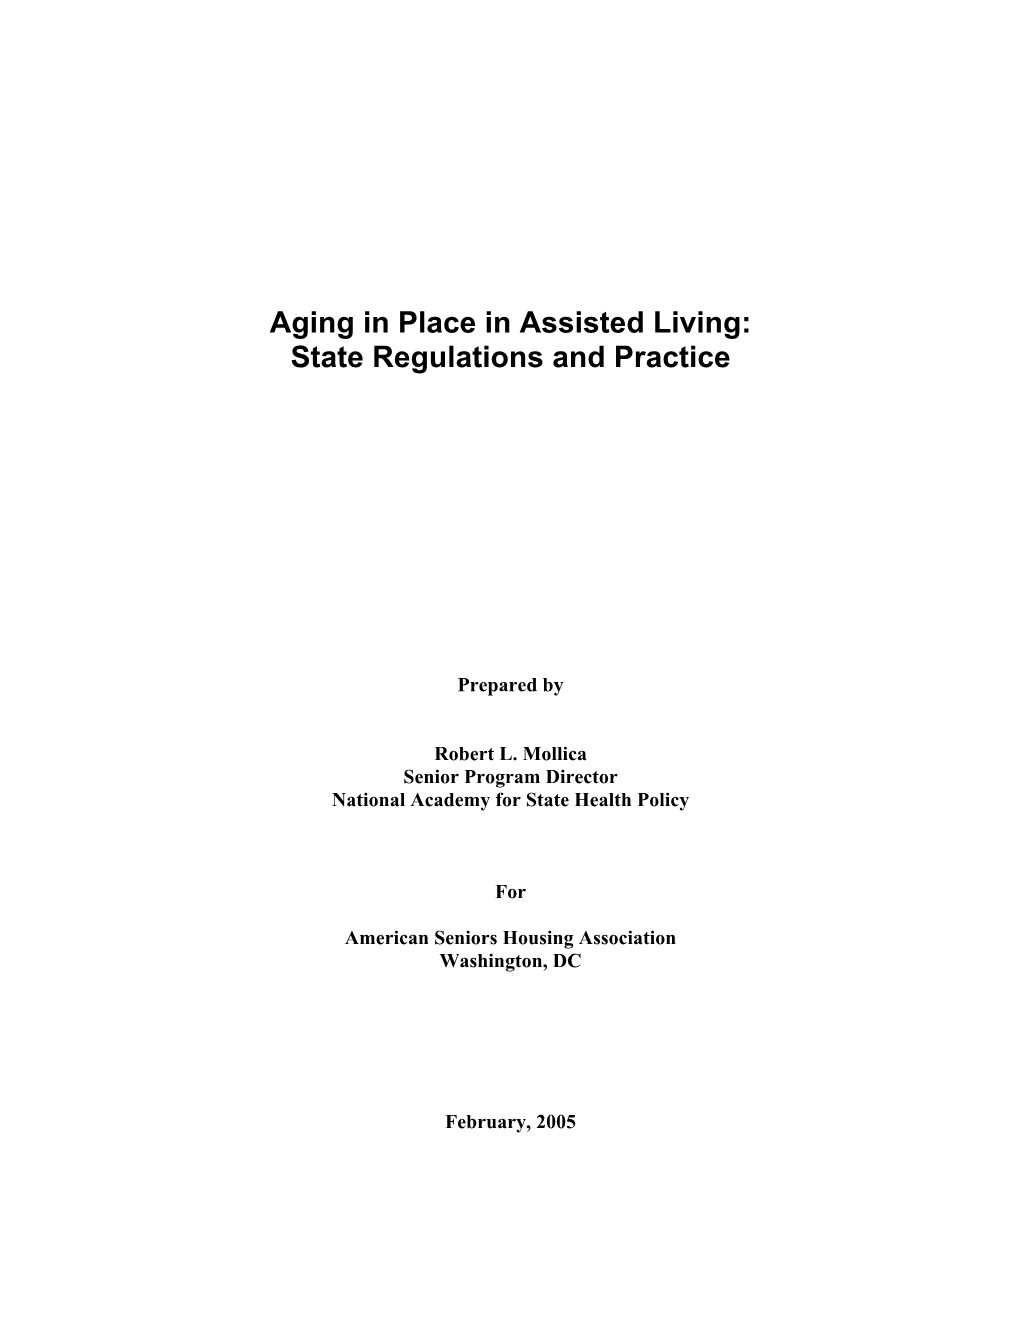 Aging in Place in Assisted Living: State Regulations and Practice